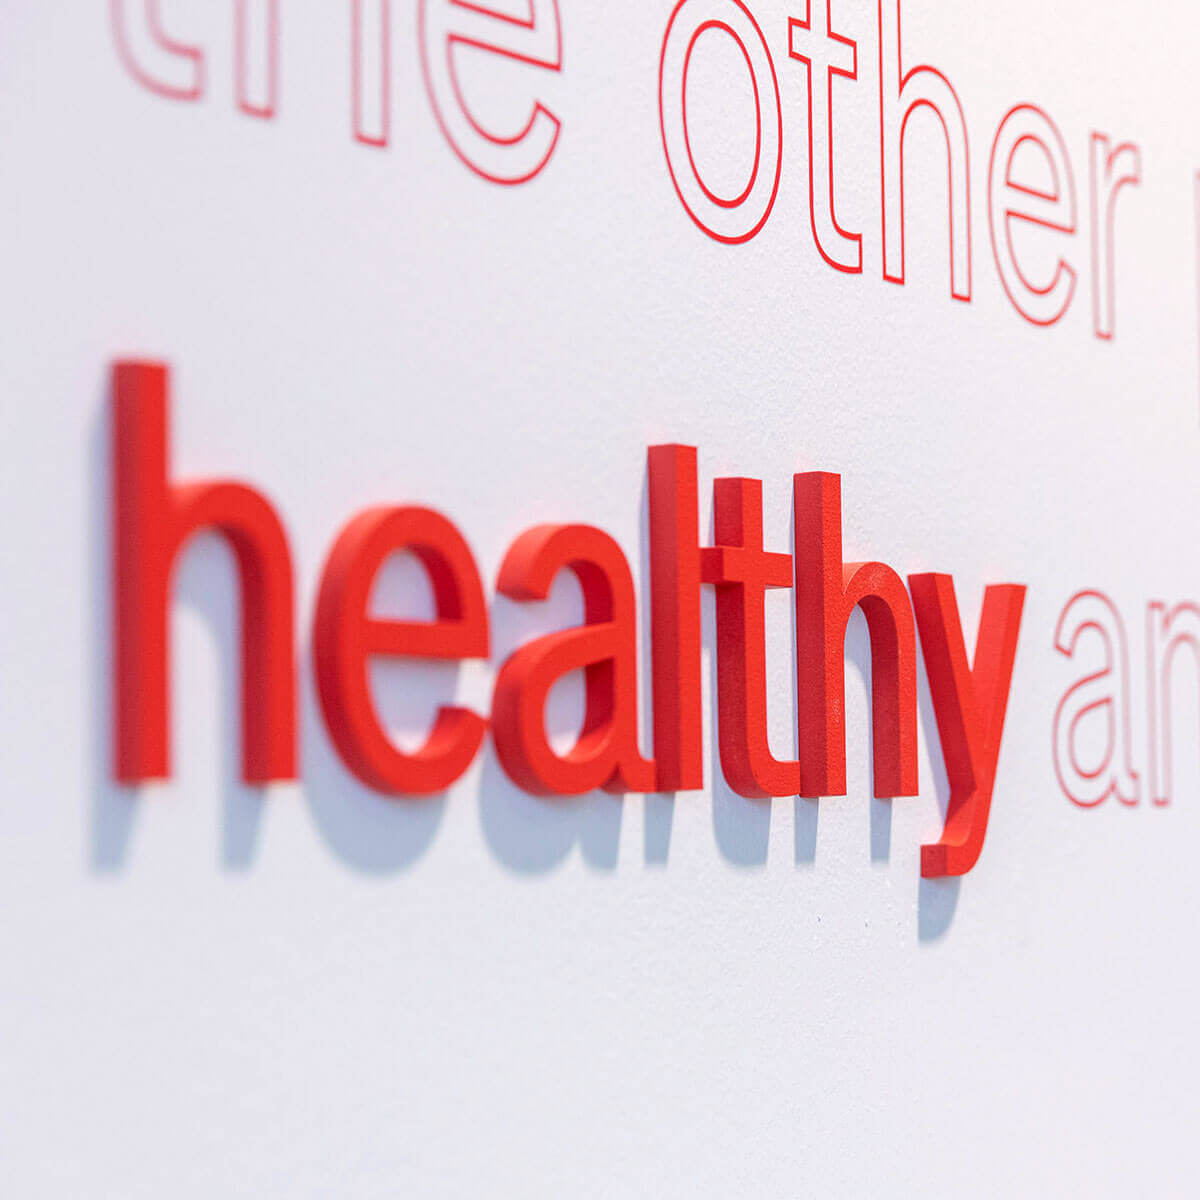 Highlands College Healthy Wall Graphics